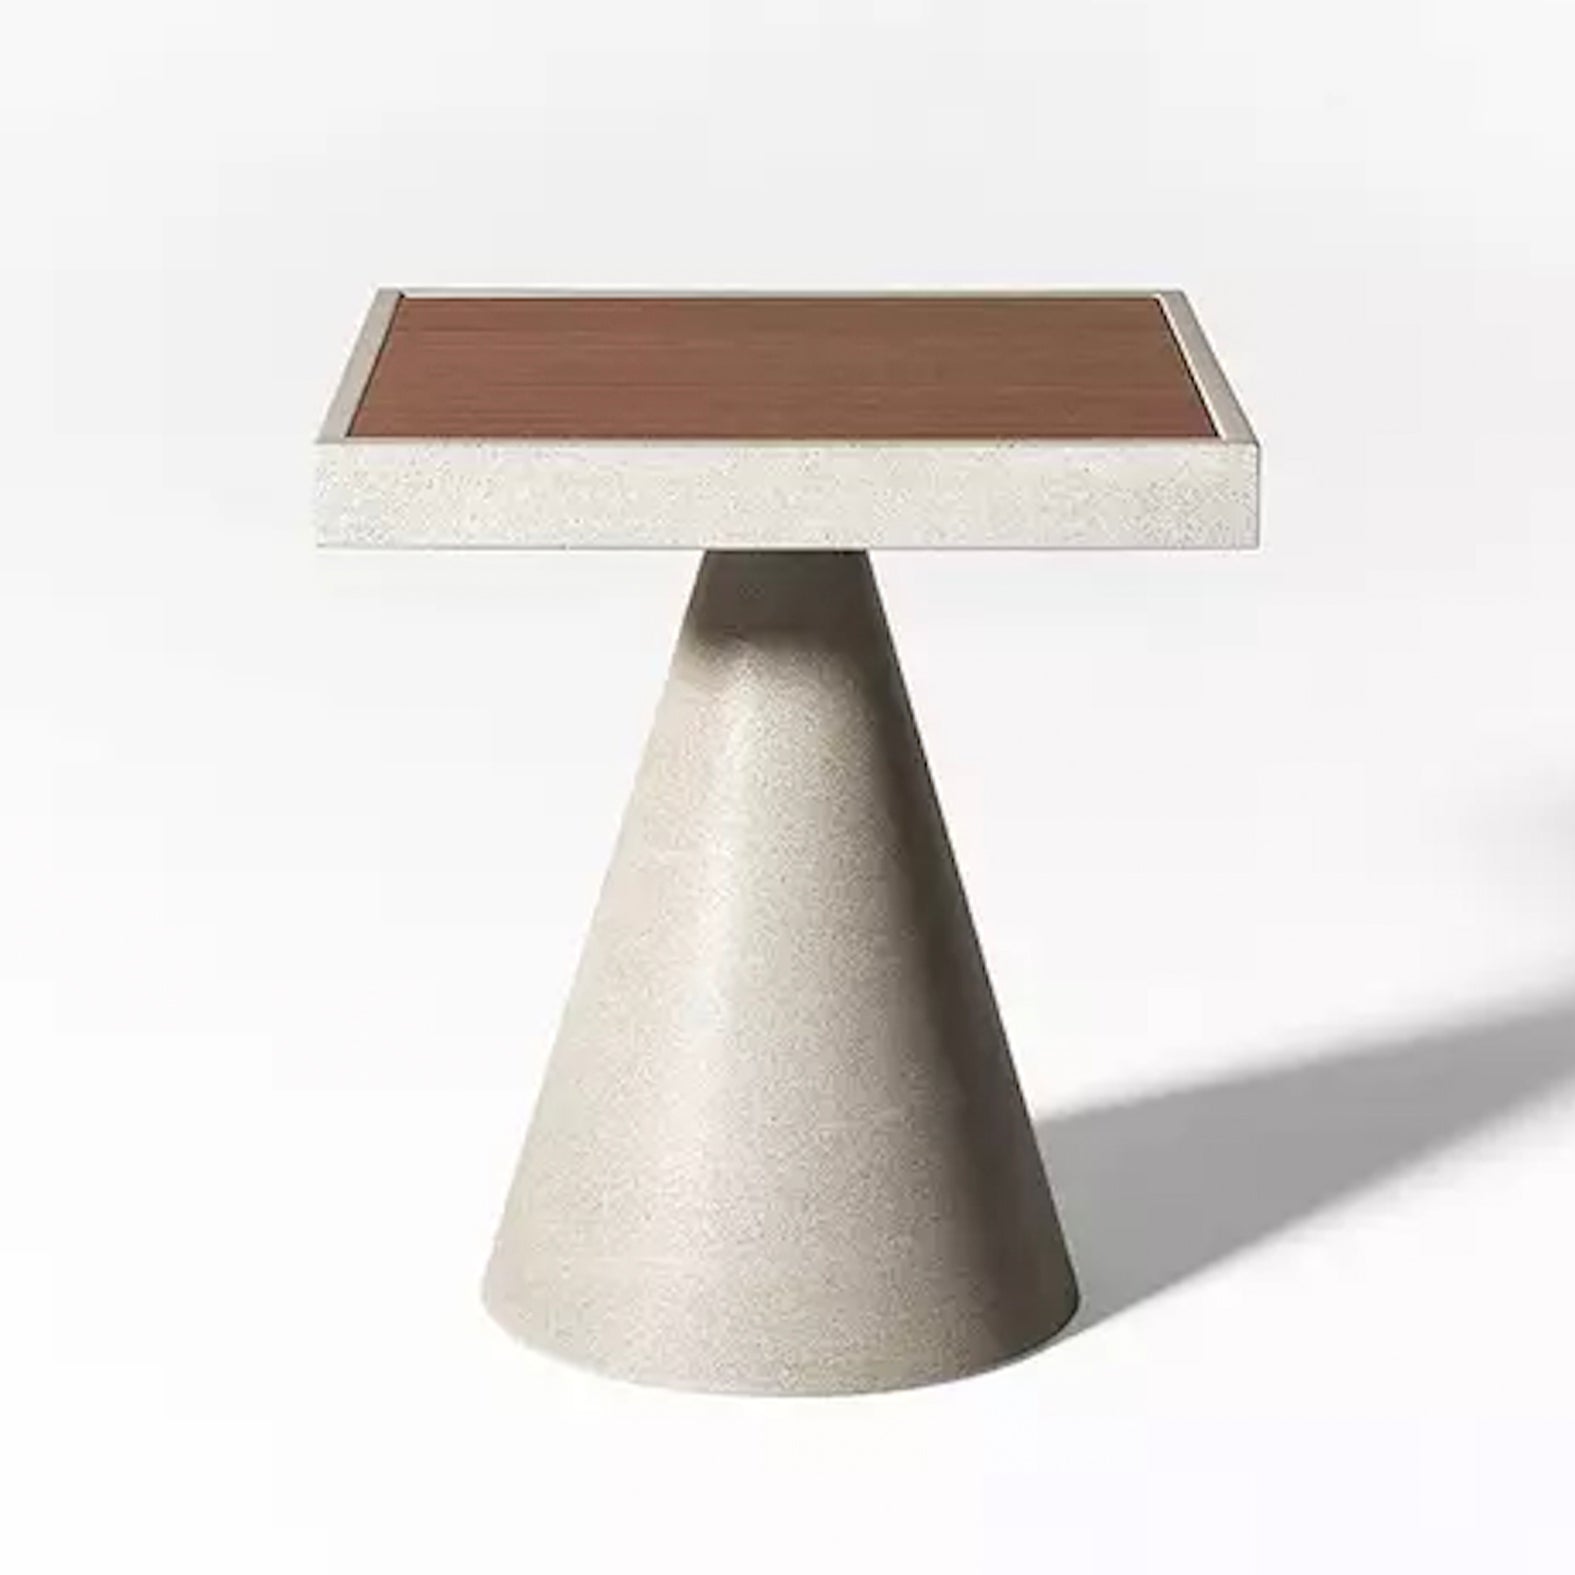 Cone Open Air Coffee Table